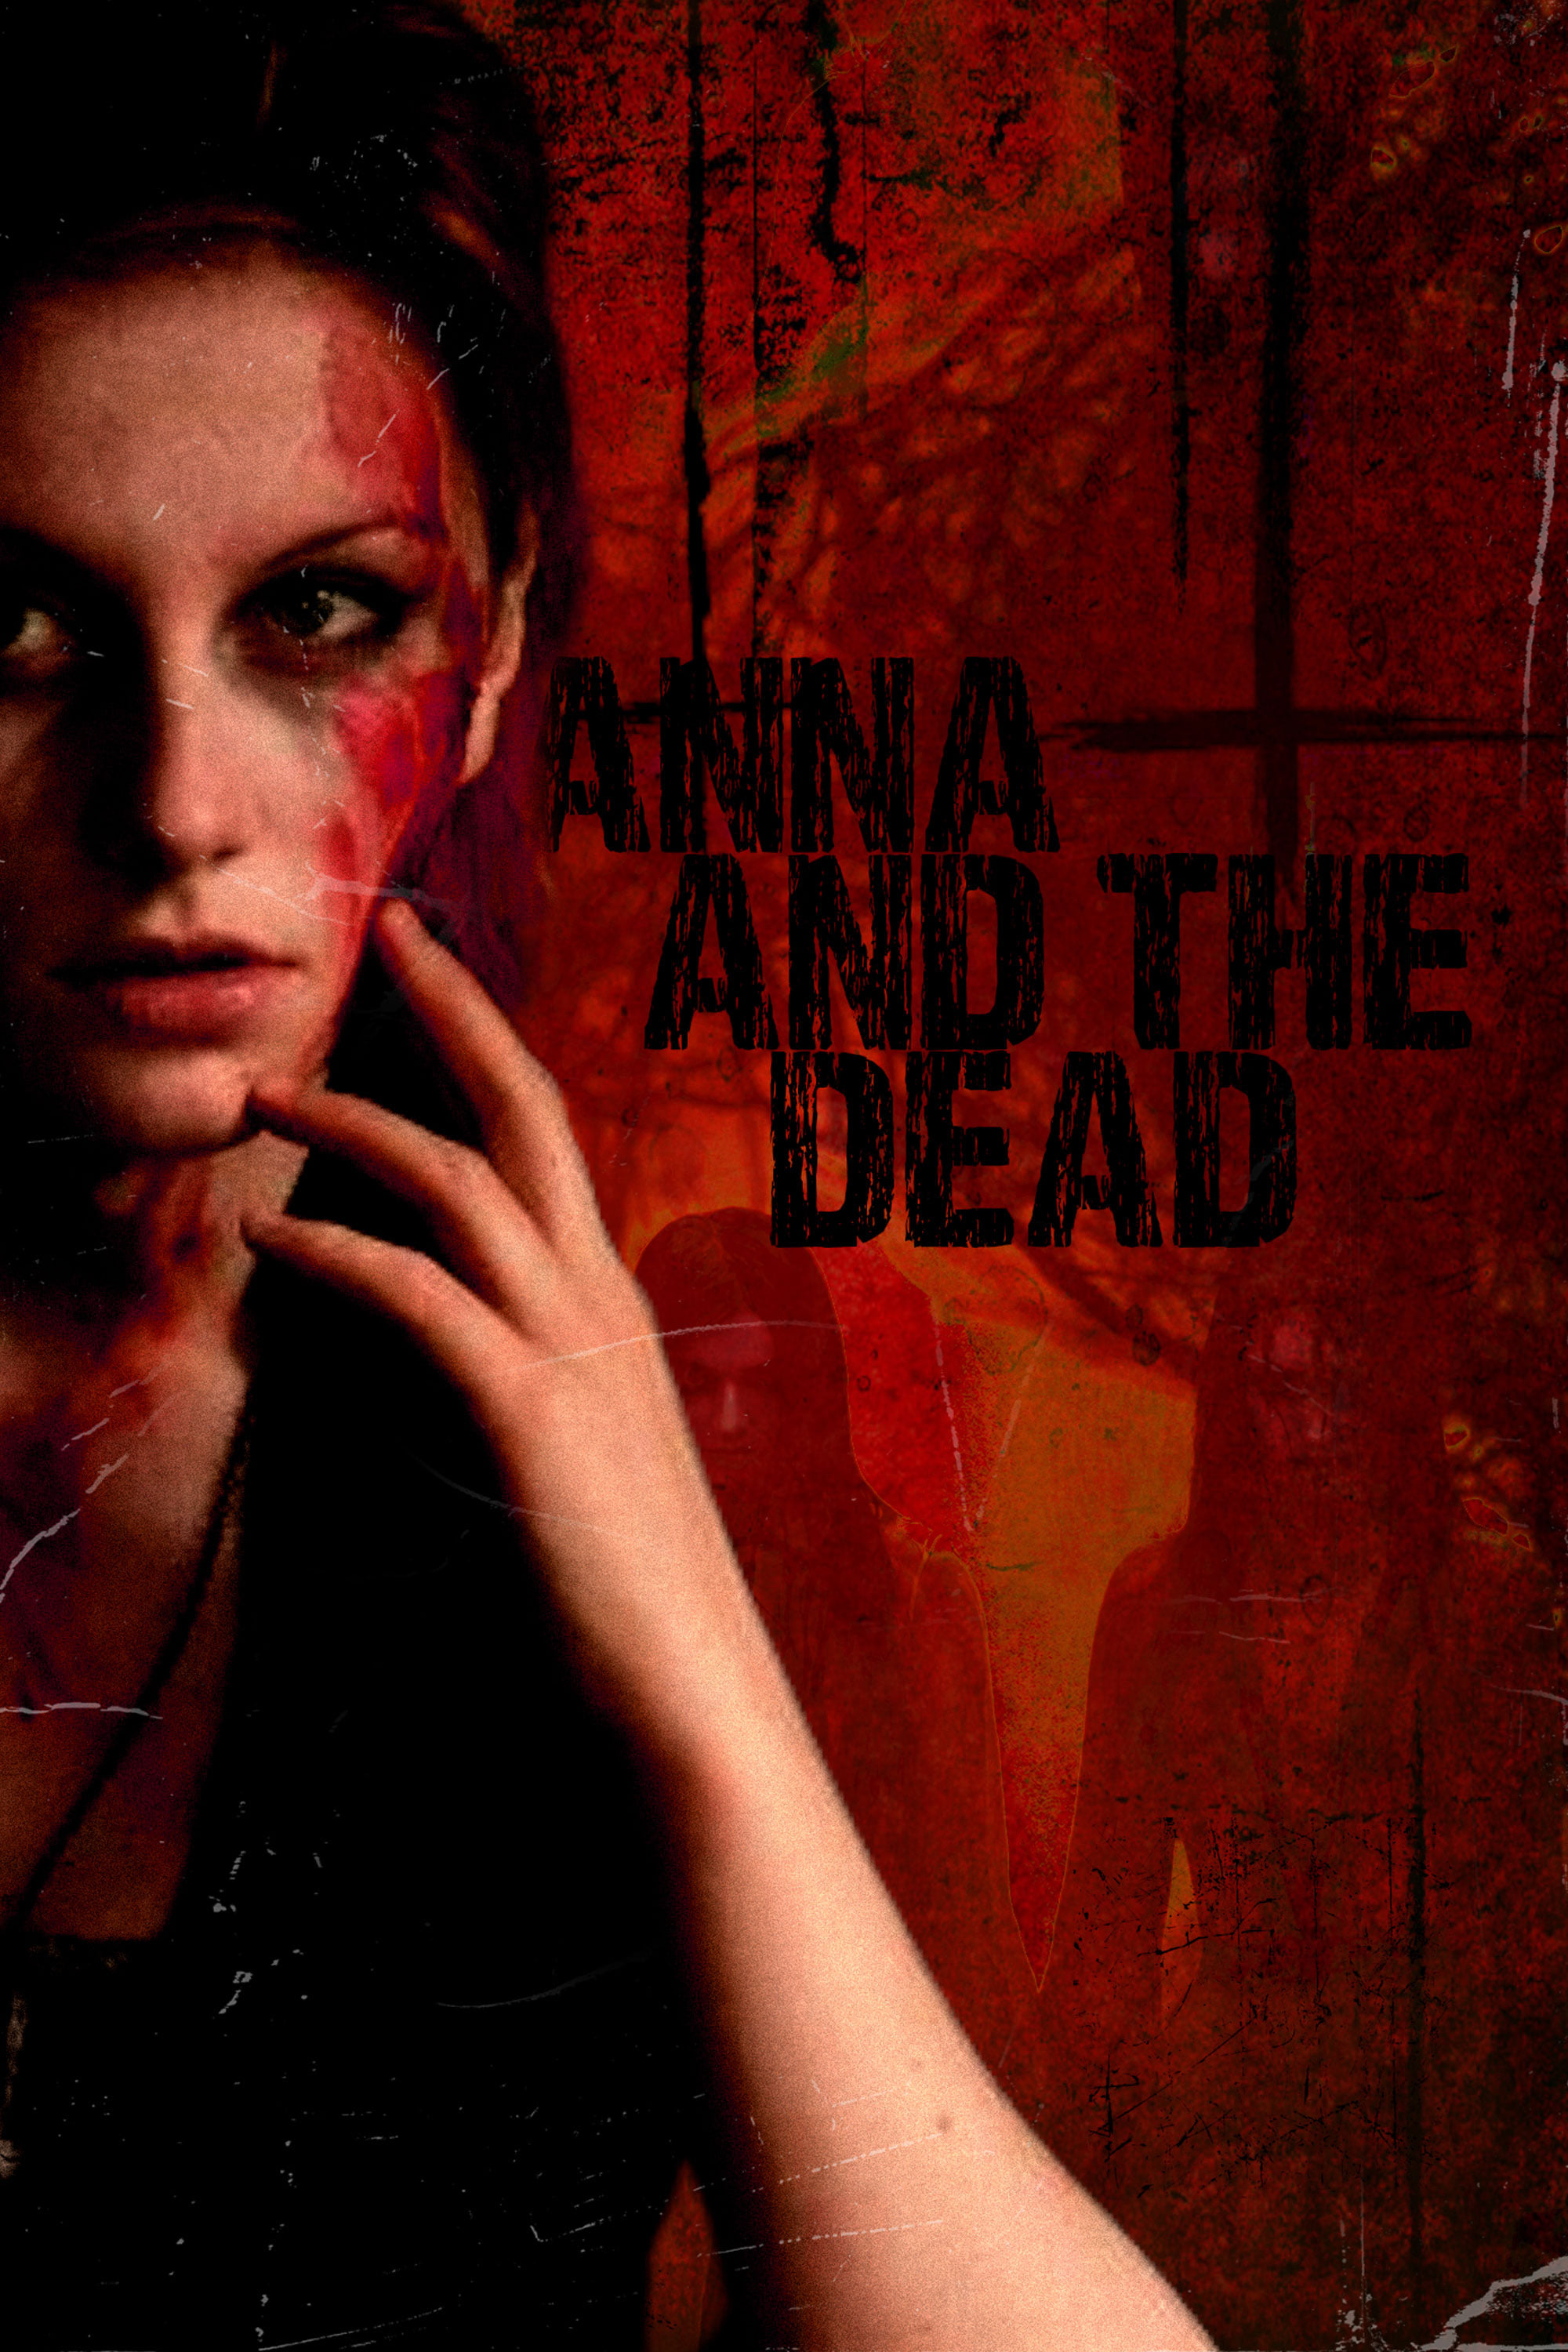 Anna and The Dead